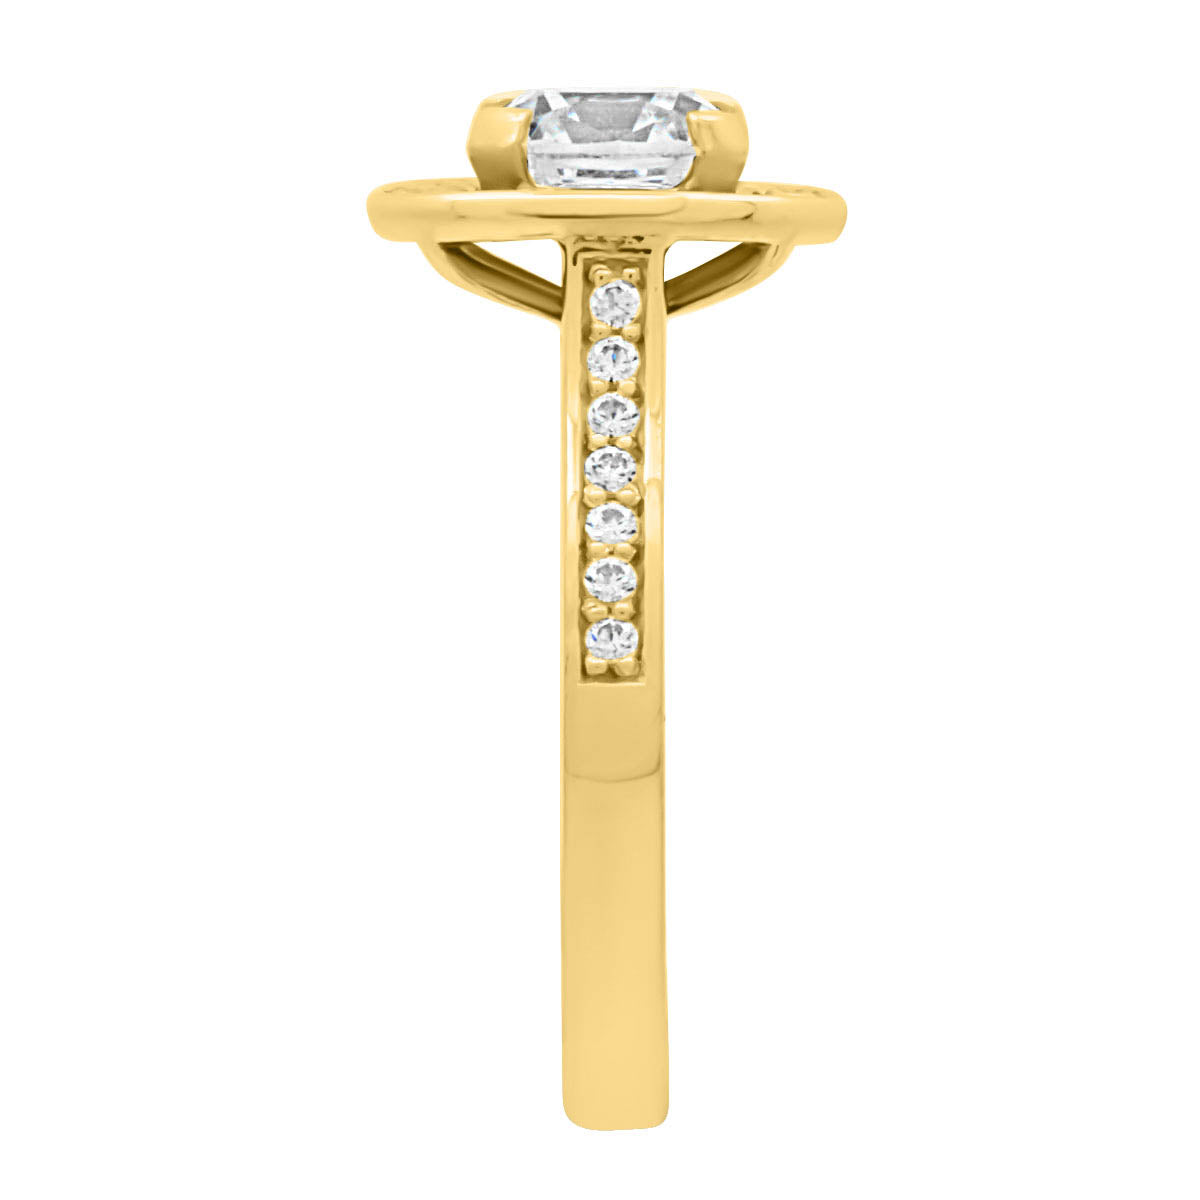 Cushion Cut Diamond Antique Diamond Ring in yellow gold in end view